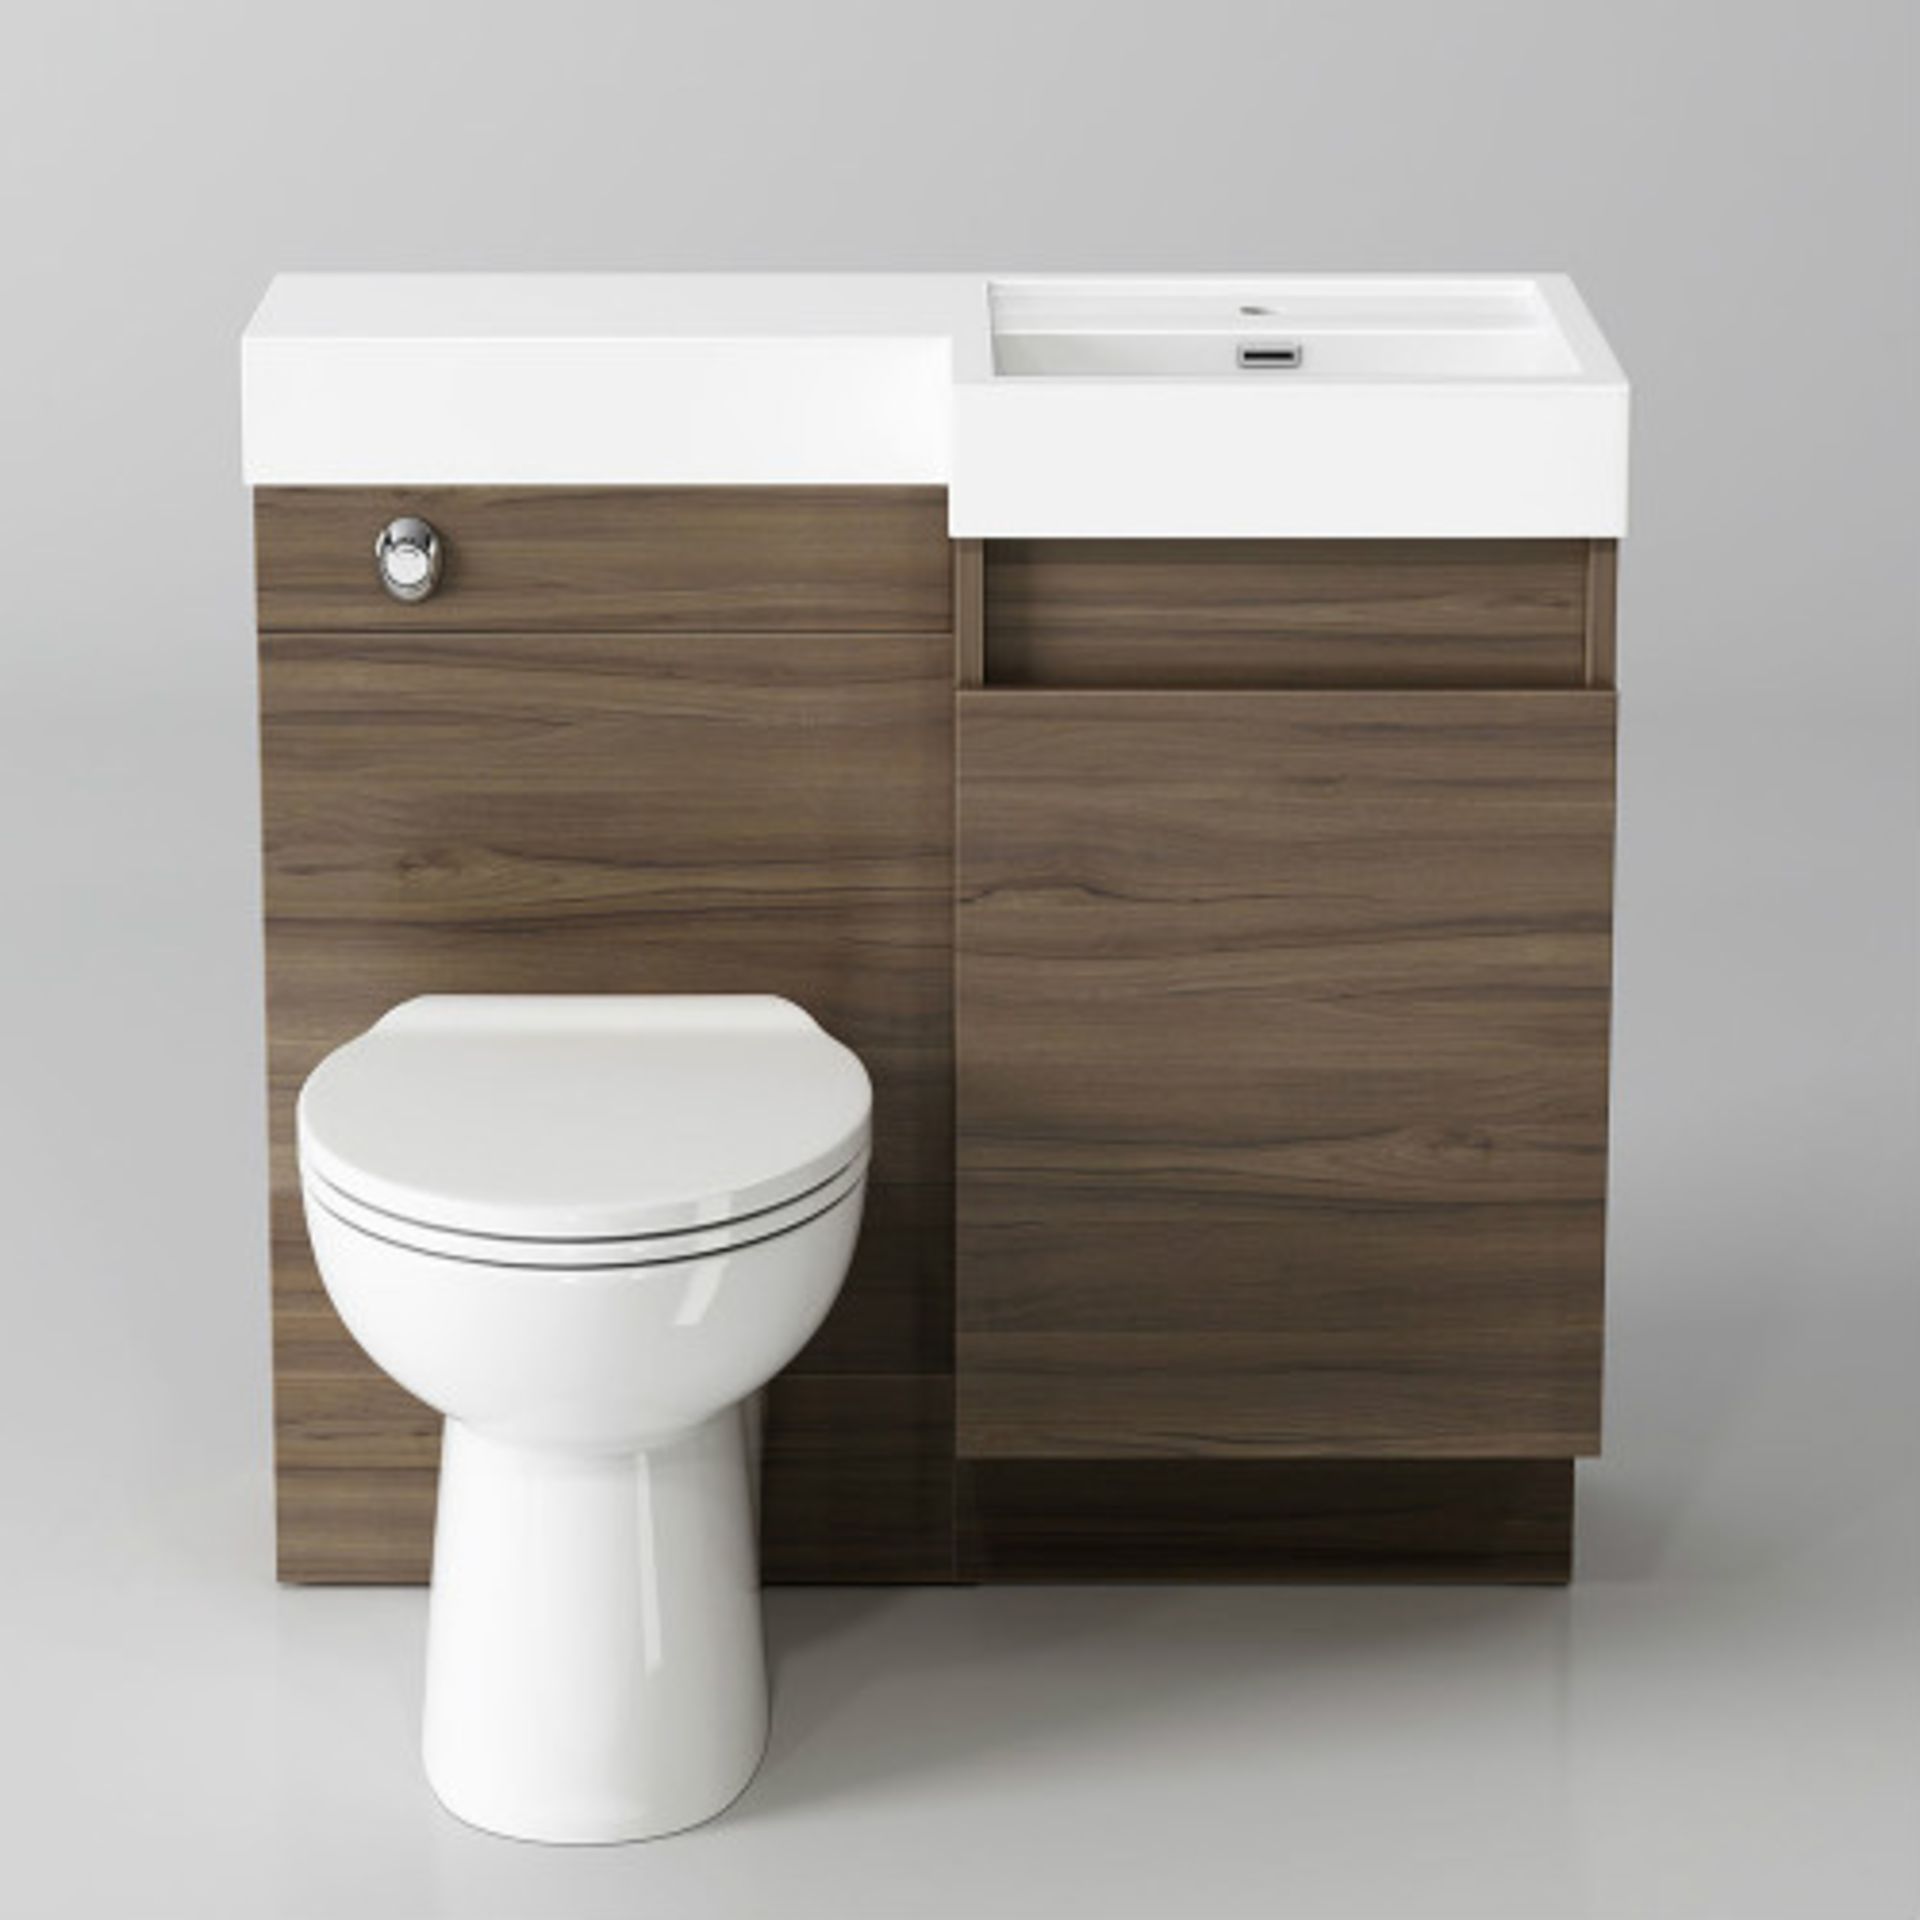 906mm Olympia Walnut Effect Drawer Vanity Unit Right with Quartz Pan. RRP £999.99.Comes comple... - Bild 2 aus 3